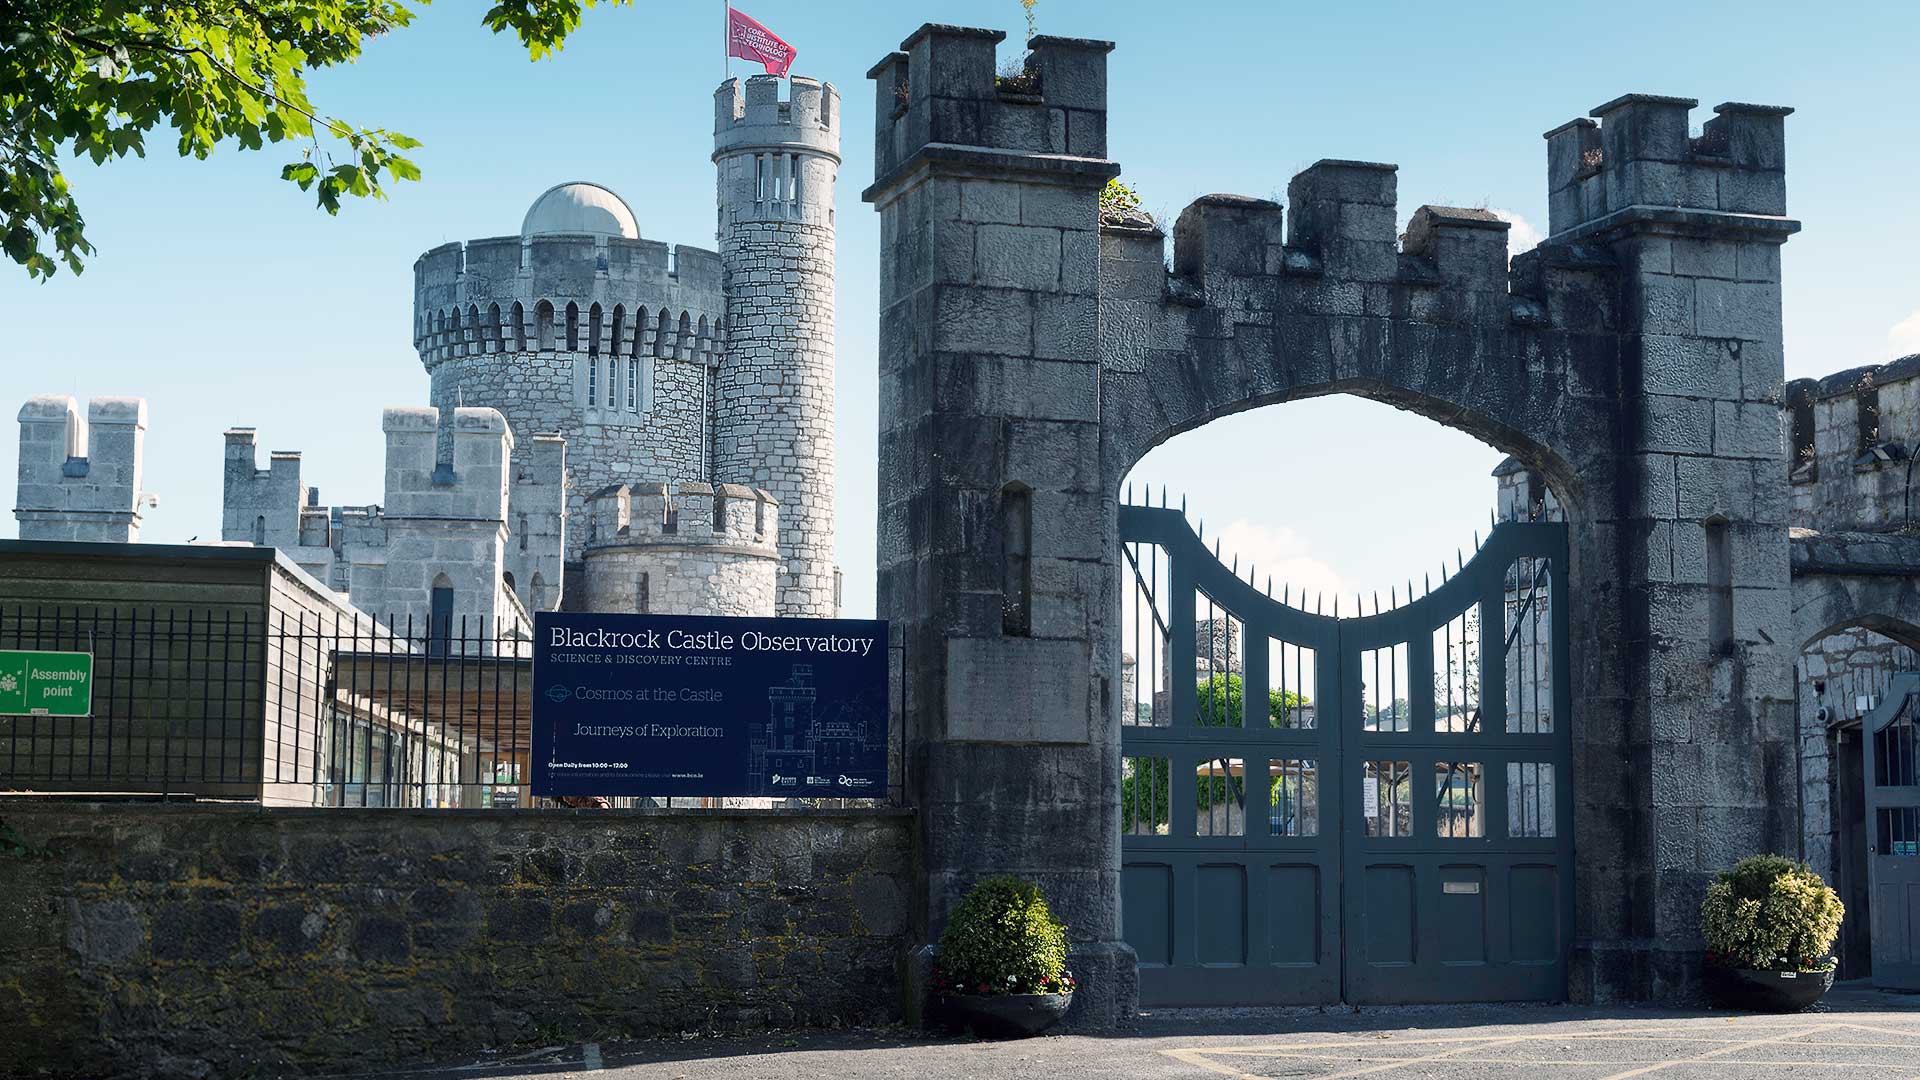 Blackrock castle in Cork view of gate and tower